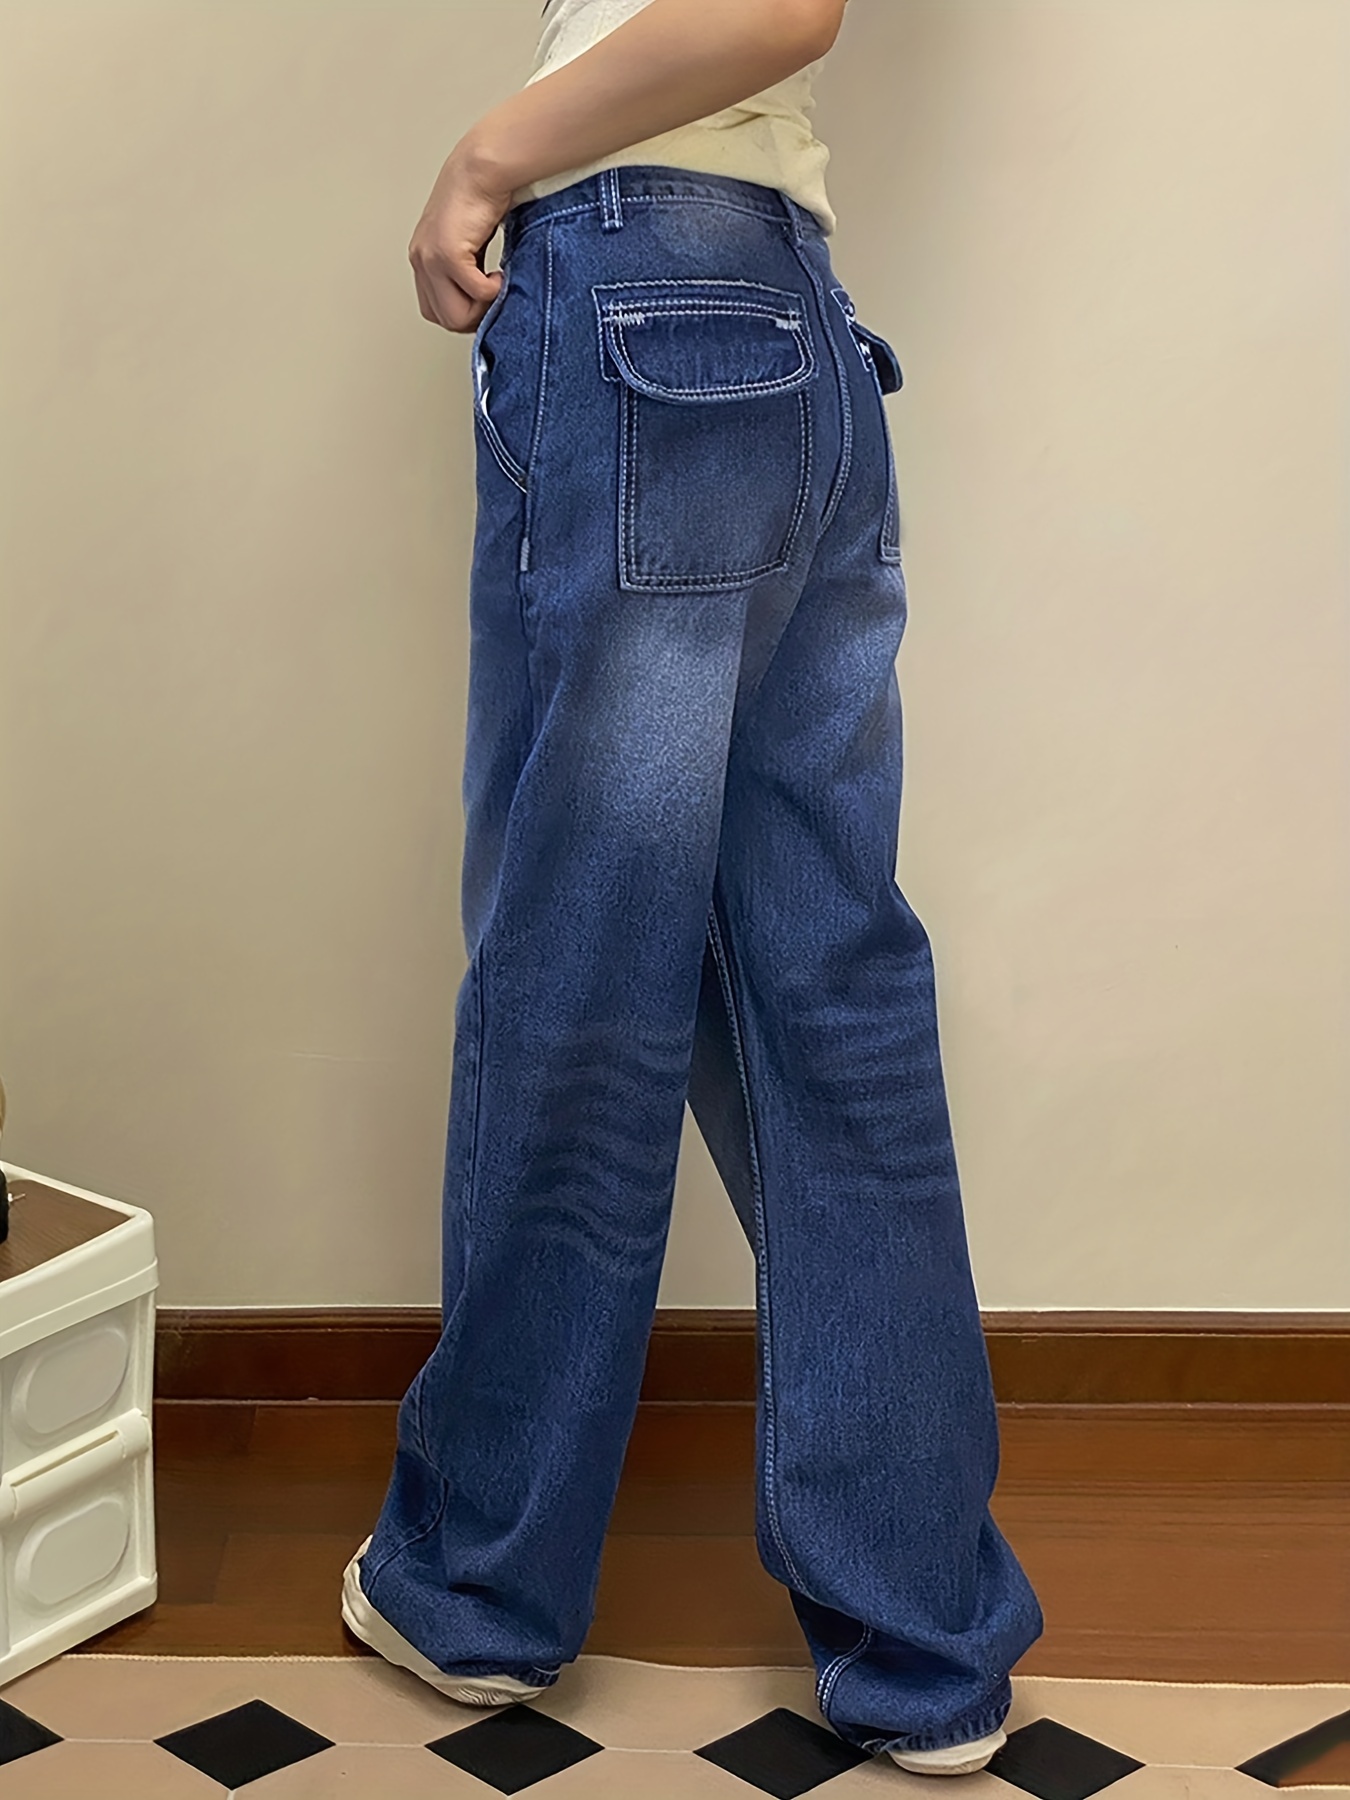 Womens Wide Leg Jeans High Waisted Straight Loose Denim Long Pants Stretch  Pockets 70s 80s 90s Fashion Retro Jeans 